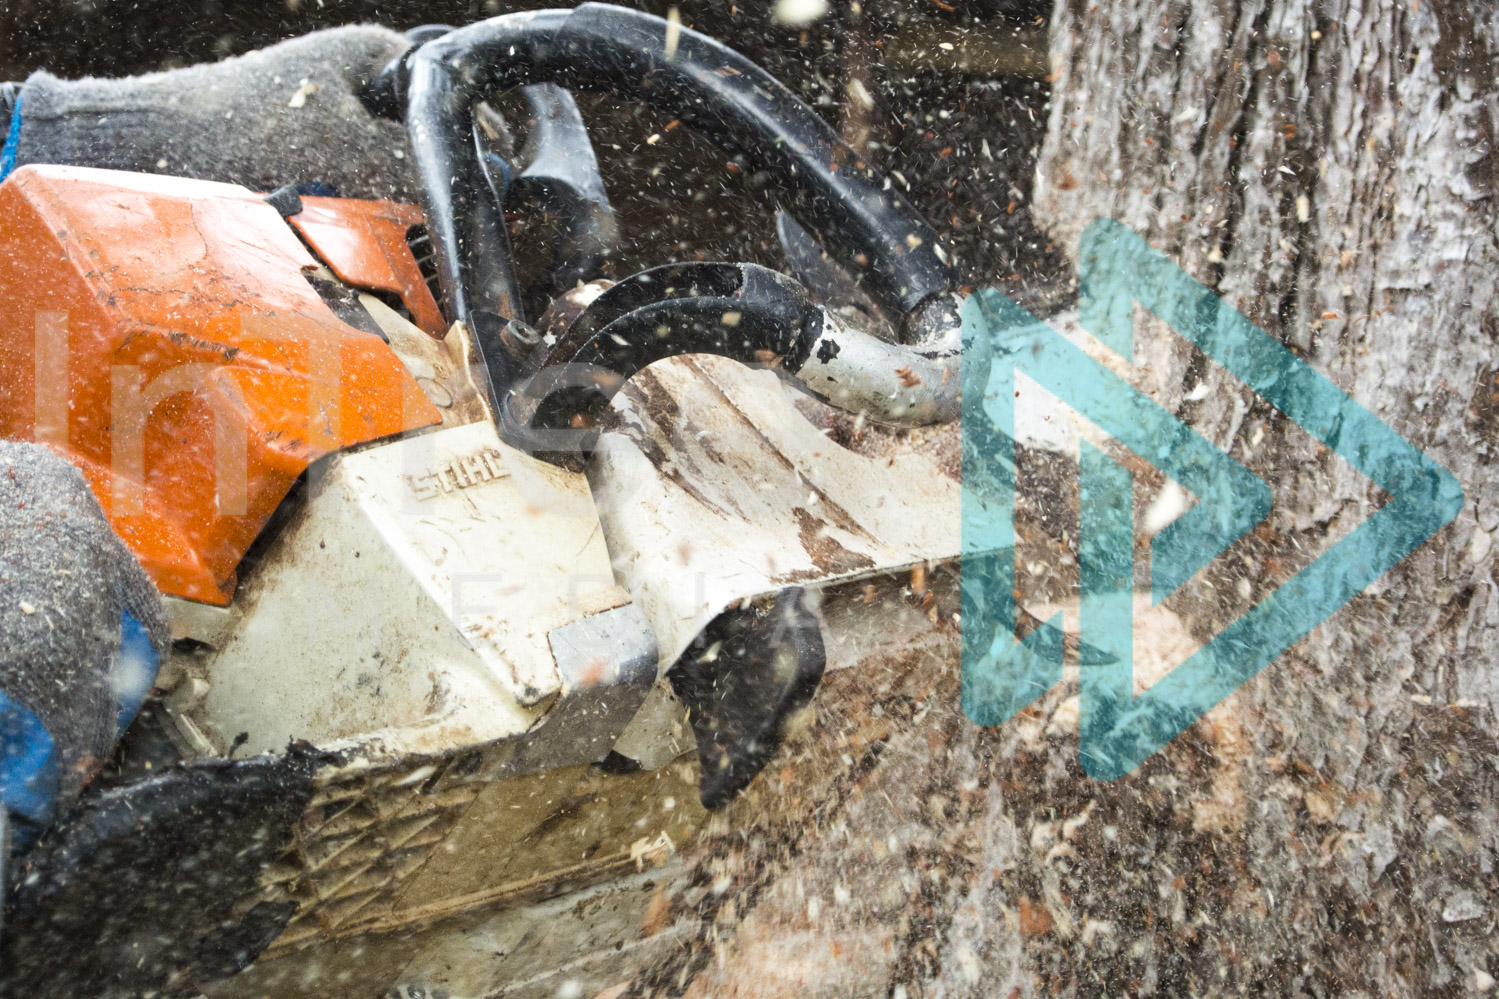 Close up of chainsaw making cut into tree sawdust spraying InTree arborist image 001-21-9894